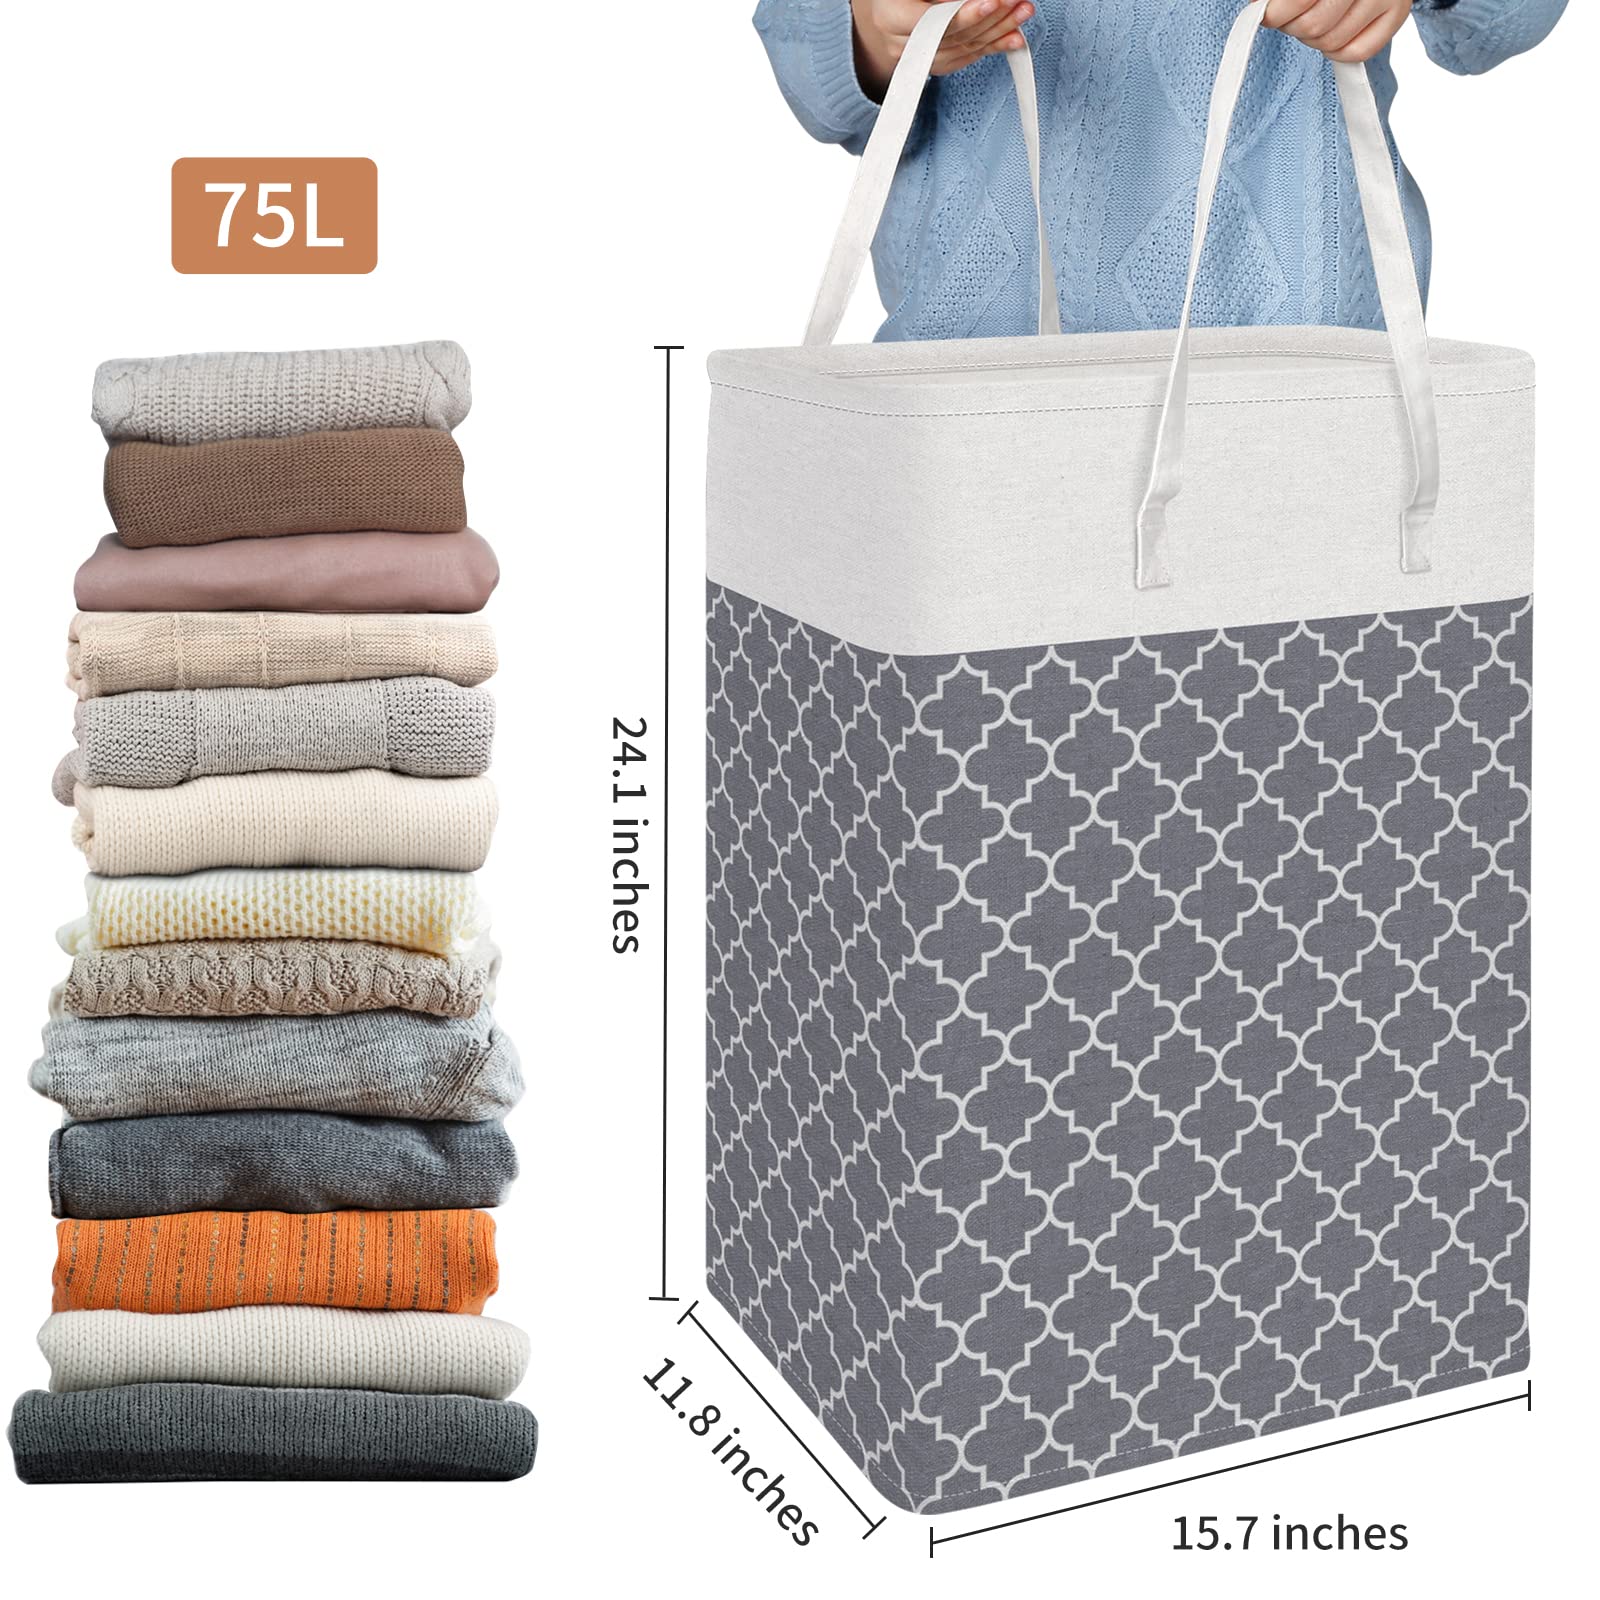 HomeHacks Laundry Baskets 2-Pack, Laundry Hamper with Long Handles, Collapsible Waterproof Clothes Hamper, Durable Tall Laundry Bin, Clothes Hamper for Bedroom, Bathroom, Dorm, Toys, 75L, Grey